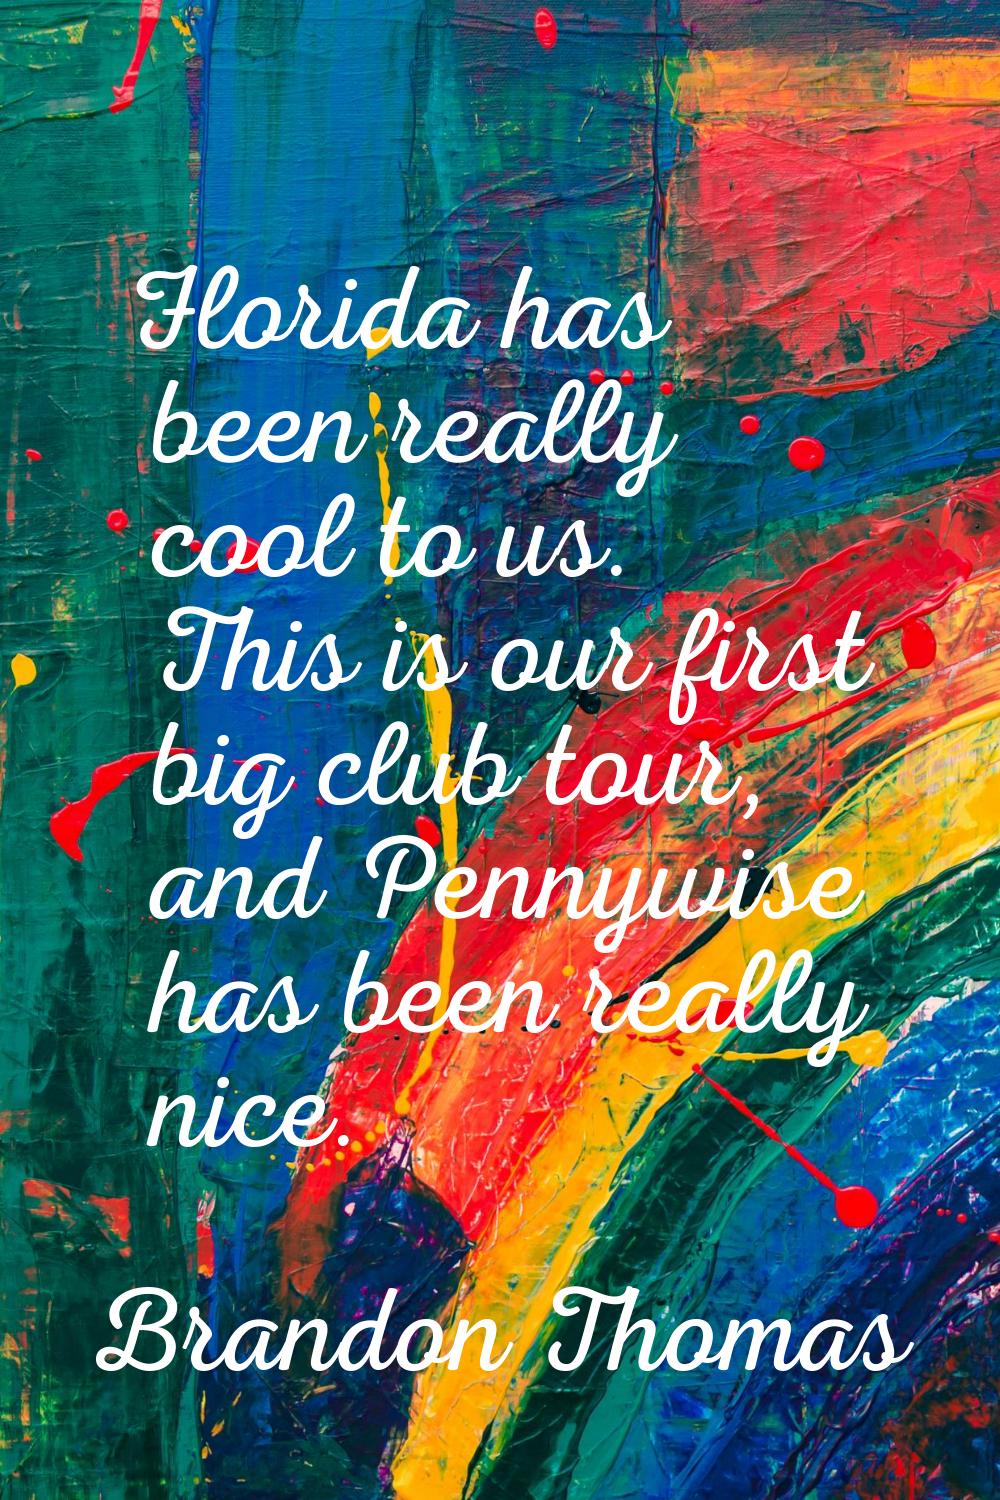 Florida has been really cool to us. This is our first big club tour, and Pennywise has been really 